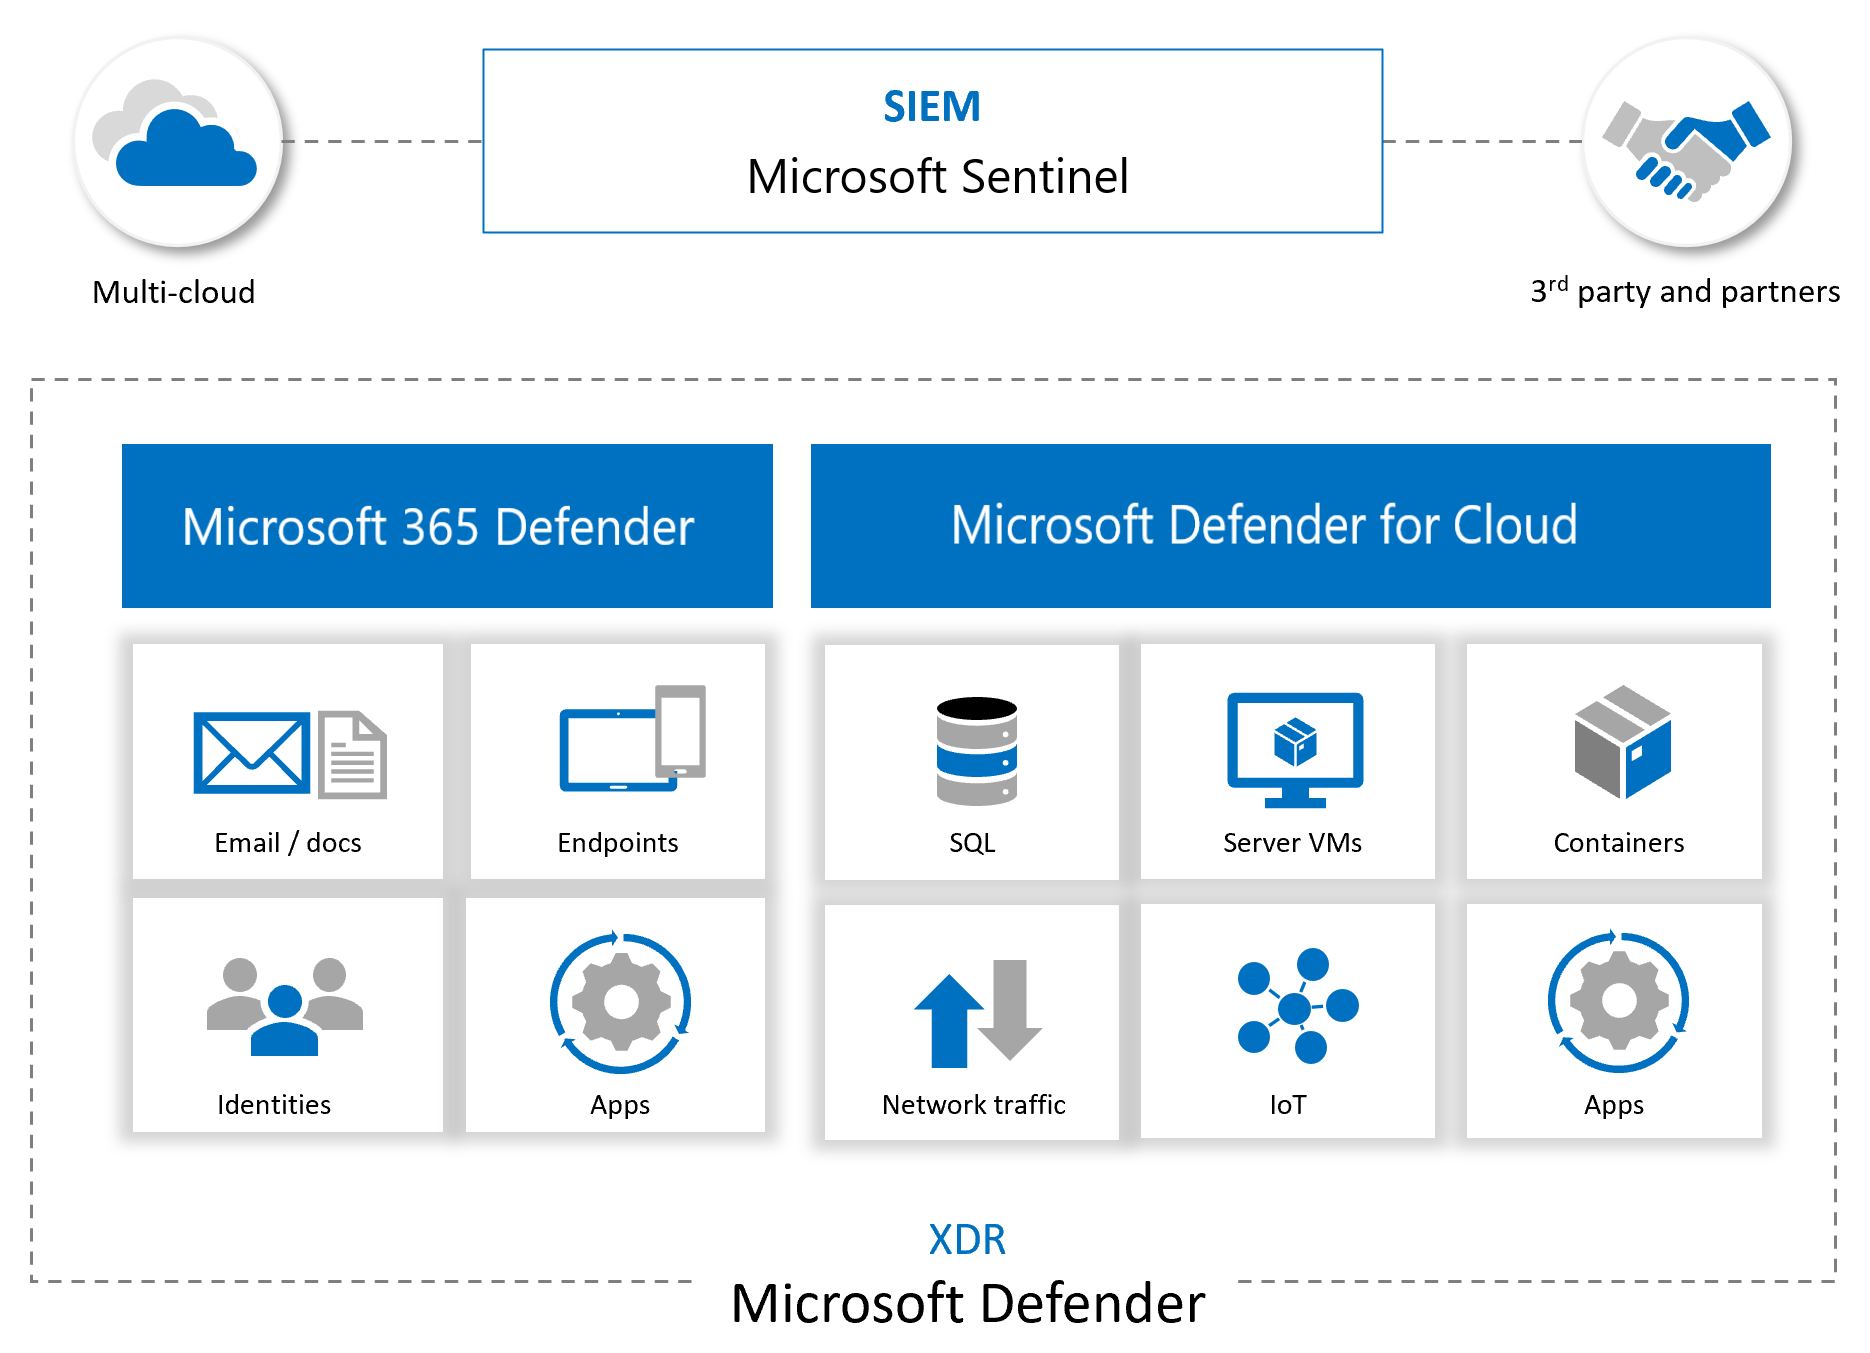 Microsoft Sentinel integrating with other Microsoft and partner services